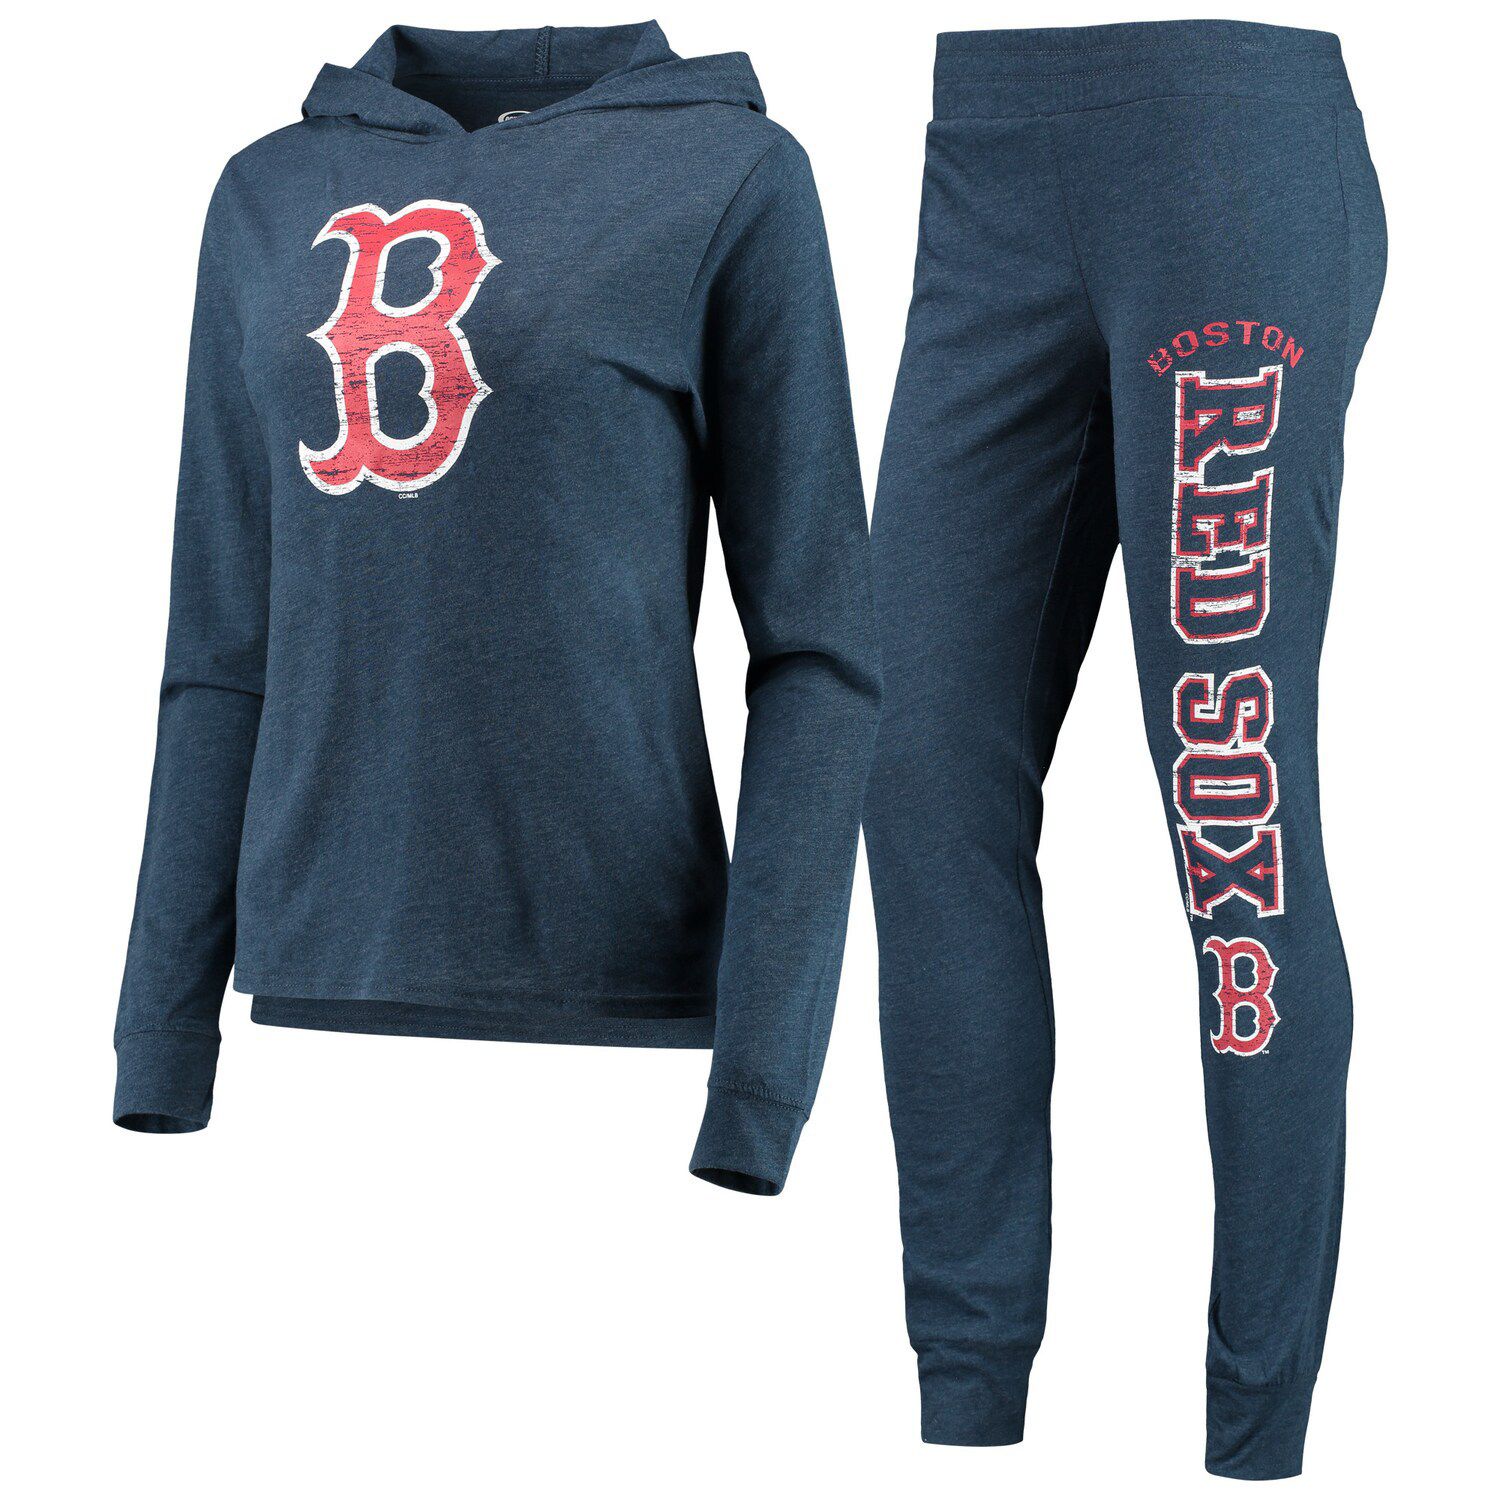 Image for Unbranded Women's Concepts Sport Navy Boston Red Sox Meter Knit Pullover Hoodie & Pants Sleep Set at Kohl's.